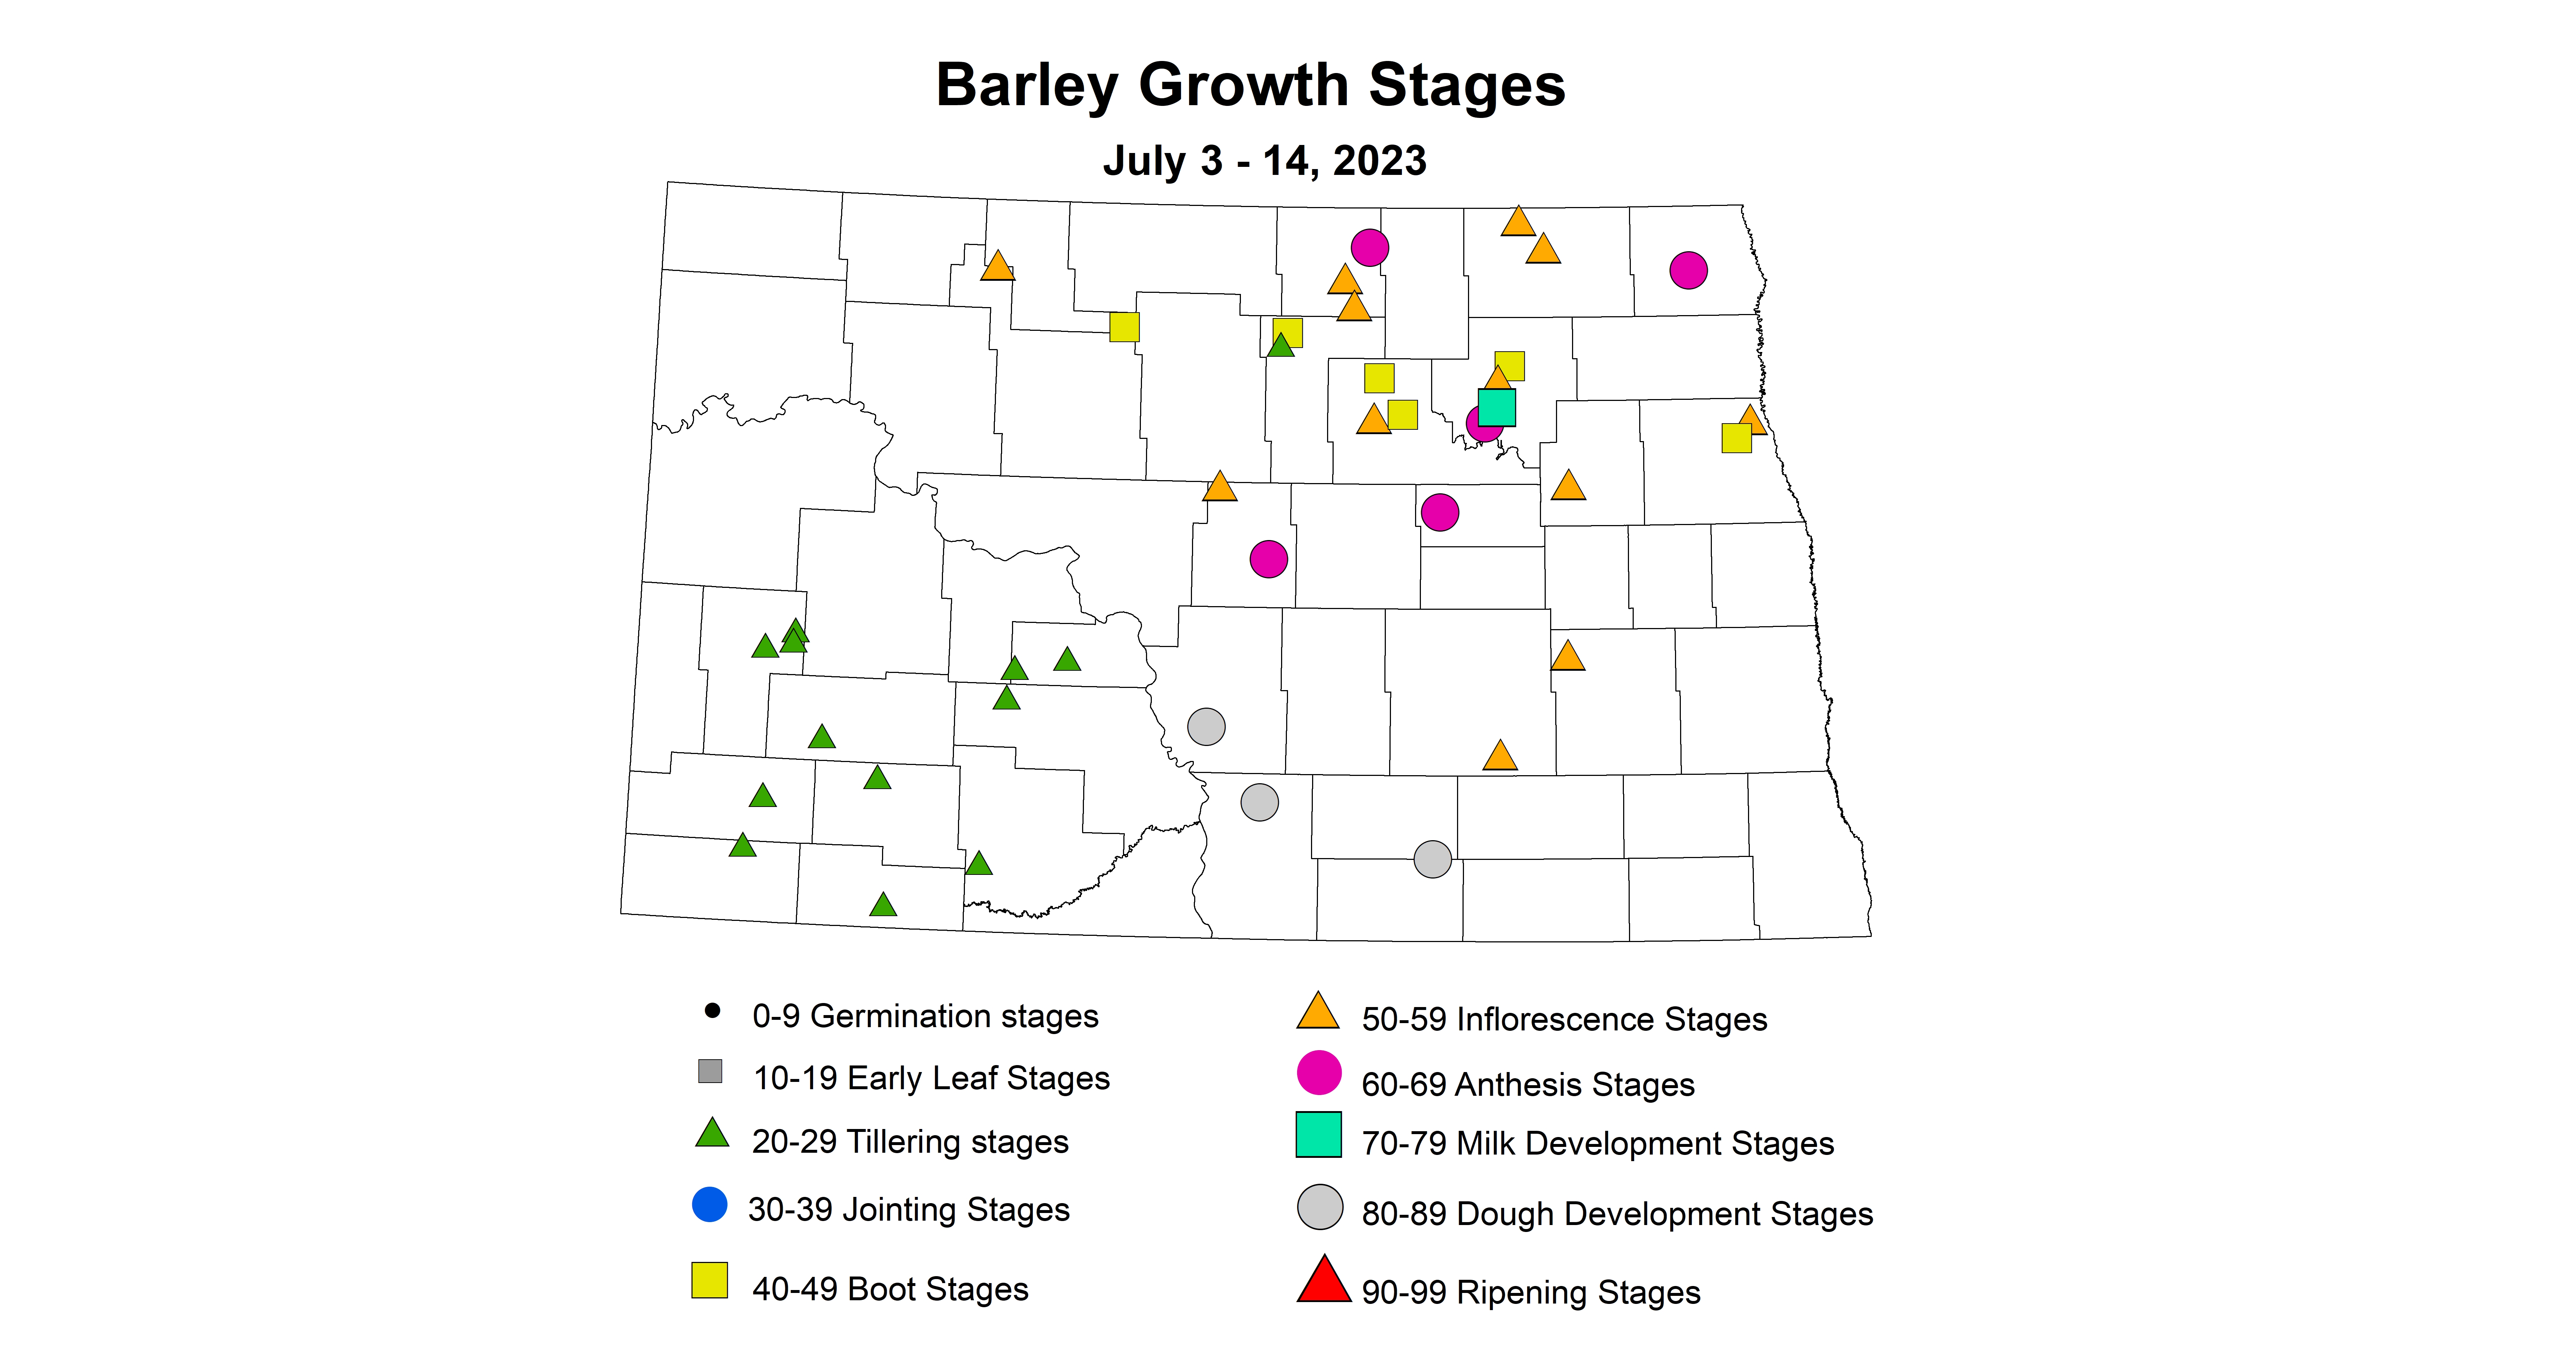 barley growth stages July 3-14 2023